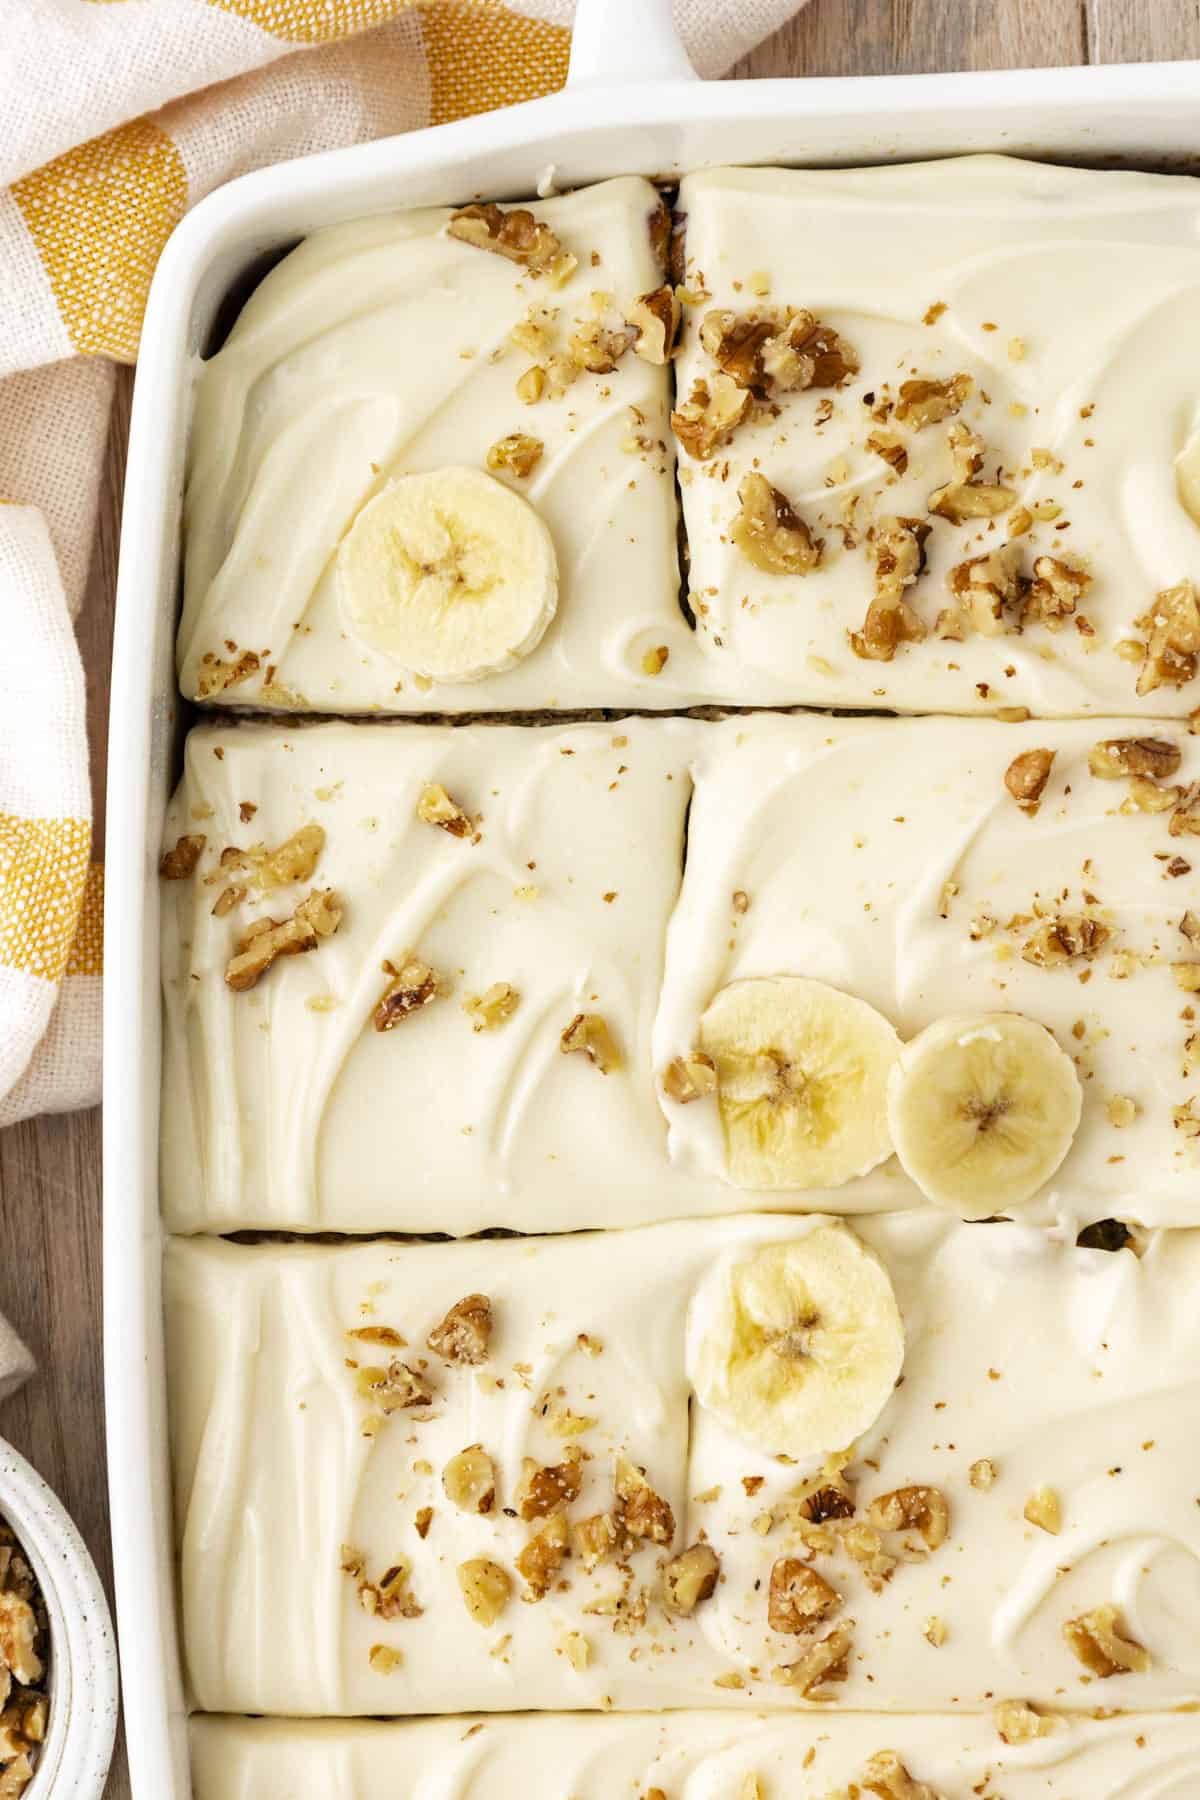 over head view of a banana cake in a white baking dish, sliced into pieces and topped with sliced bananas and chopped walnuts, with a yellow and white striped kitchen towel beside the pan